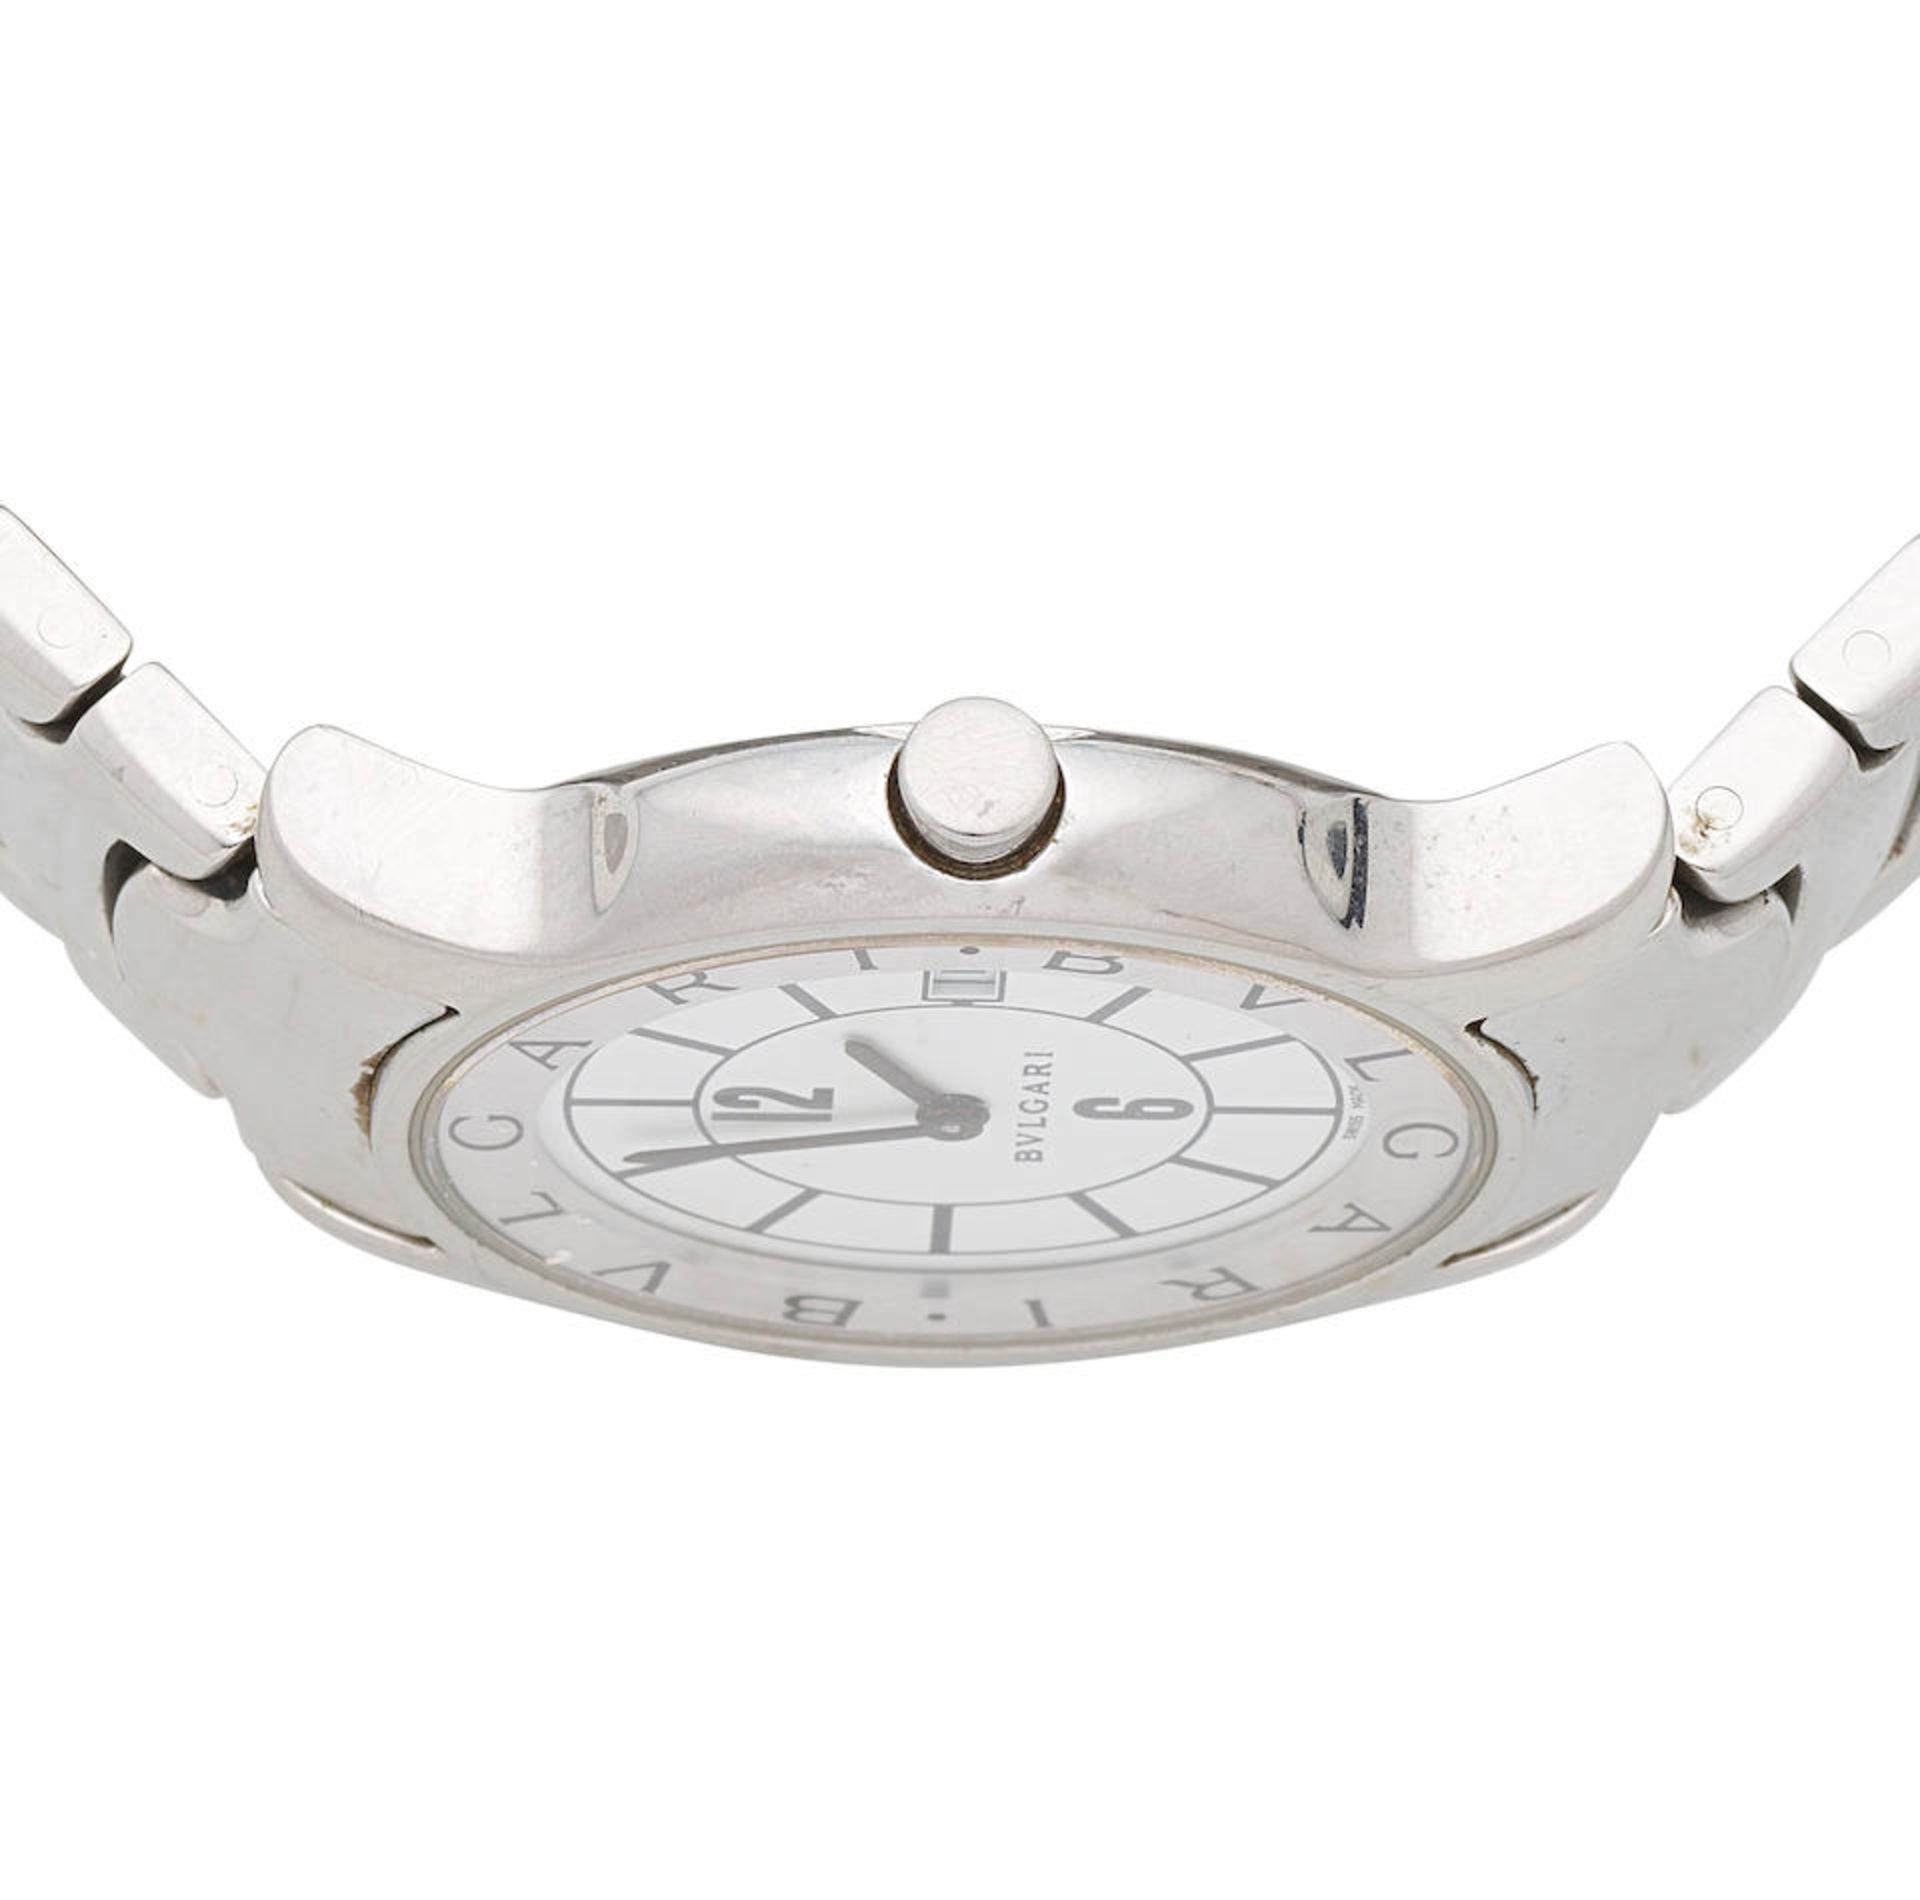 Bulgari. A Limited Edition stainless steel quartz calendar bracelet watch Solotempo, Ref: ST 35... - Image 3 of 4